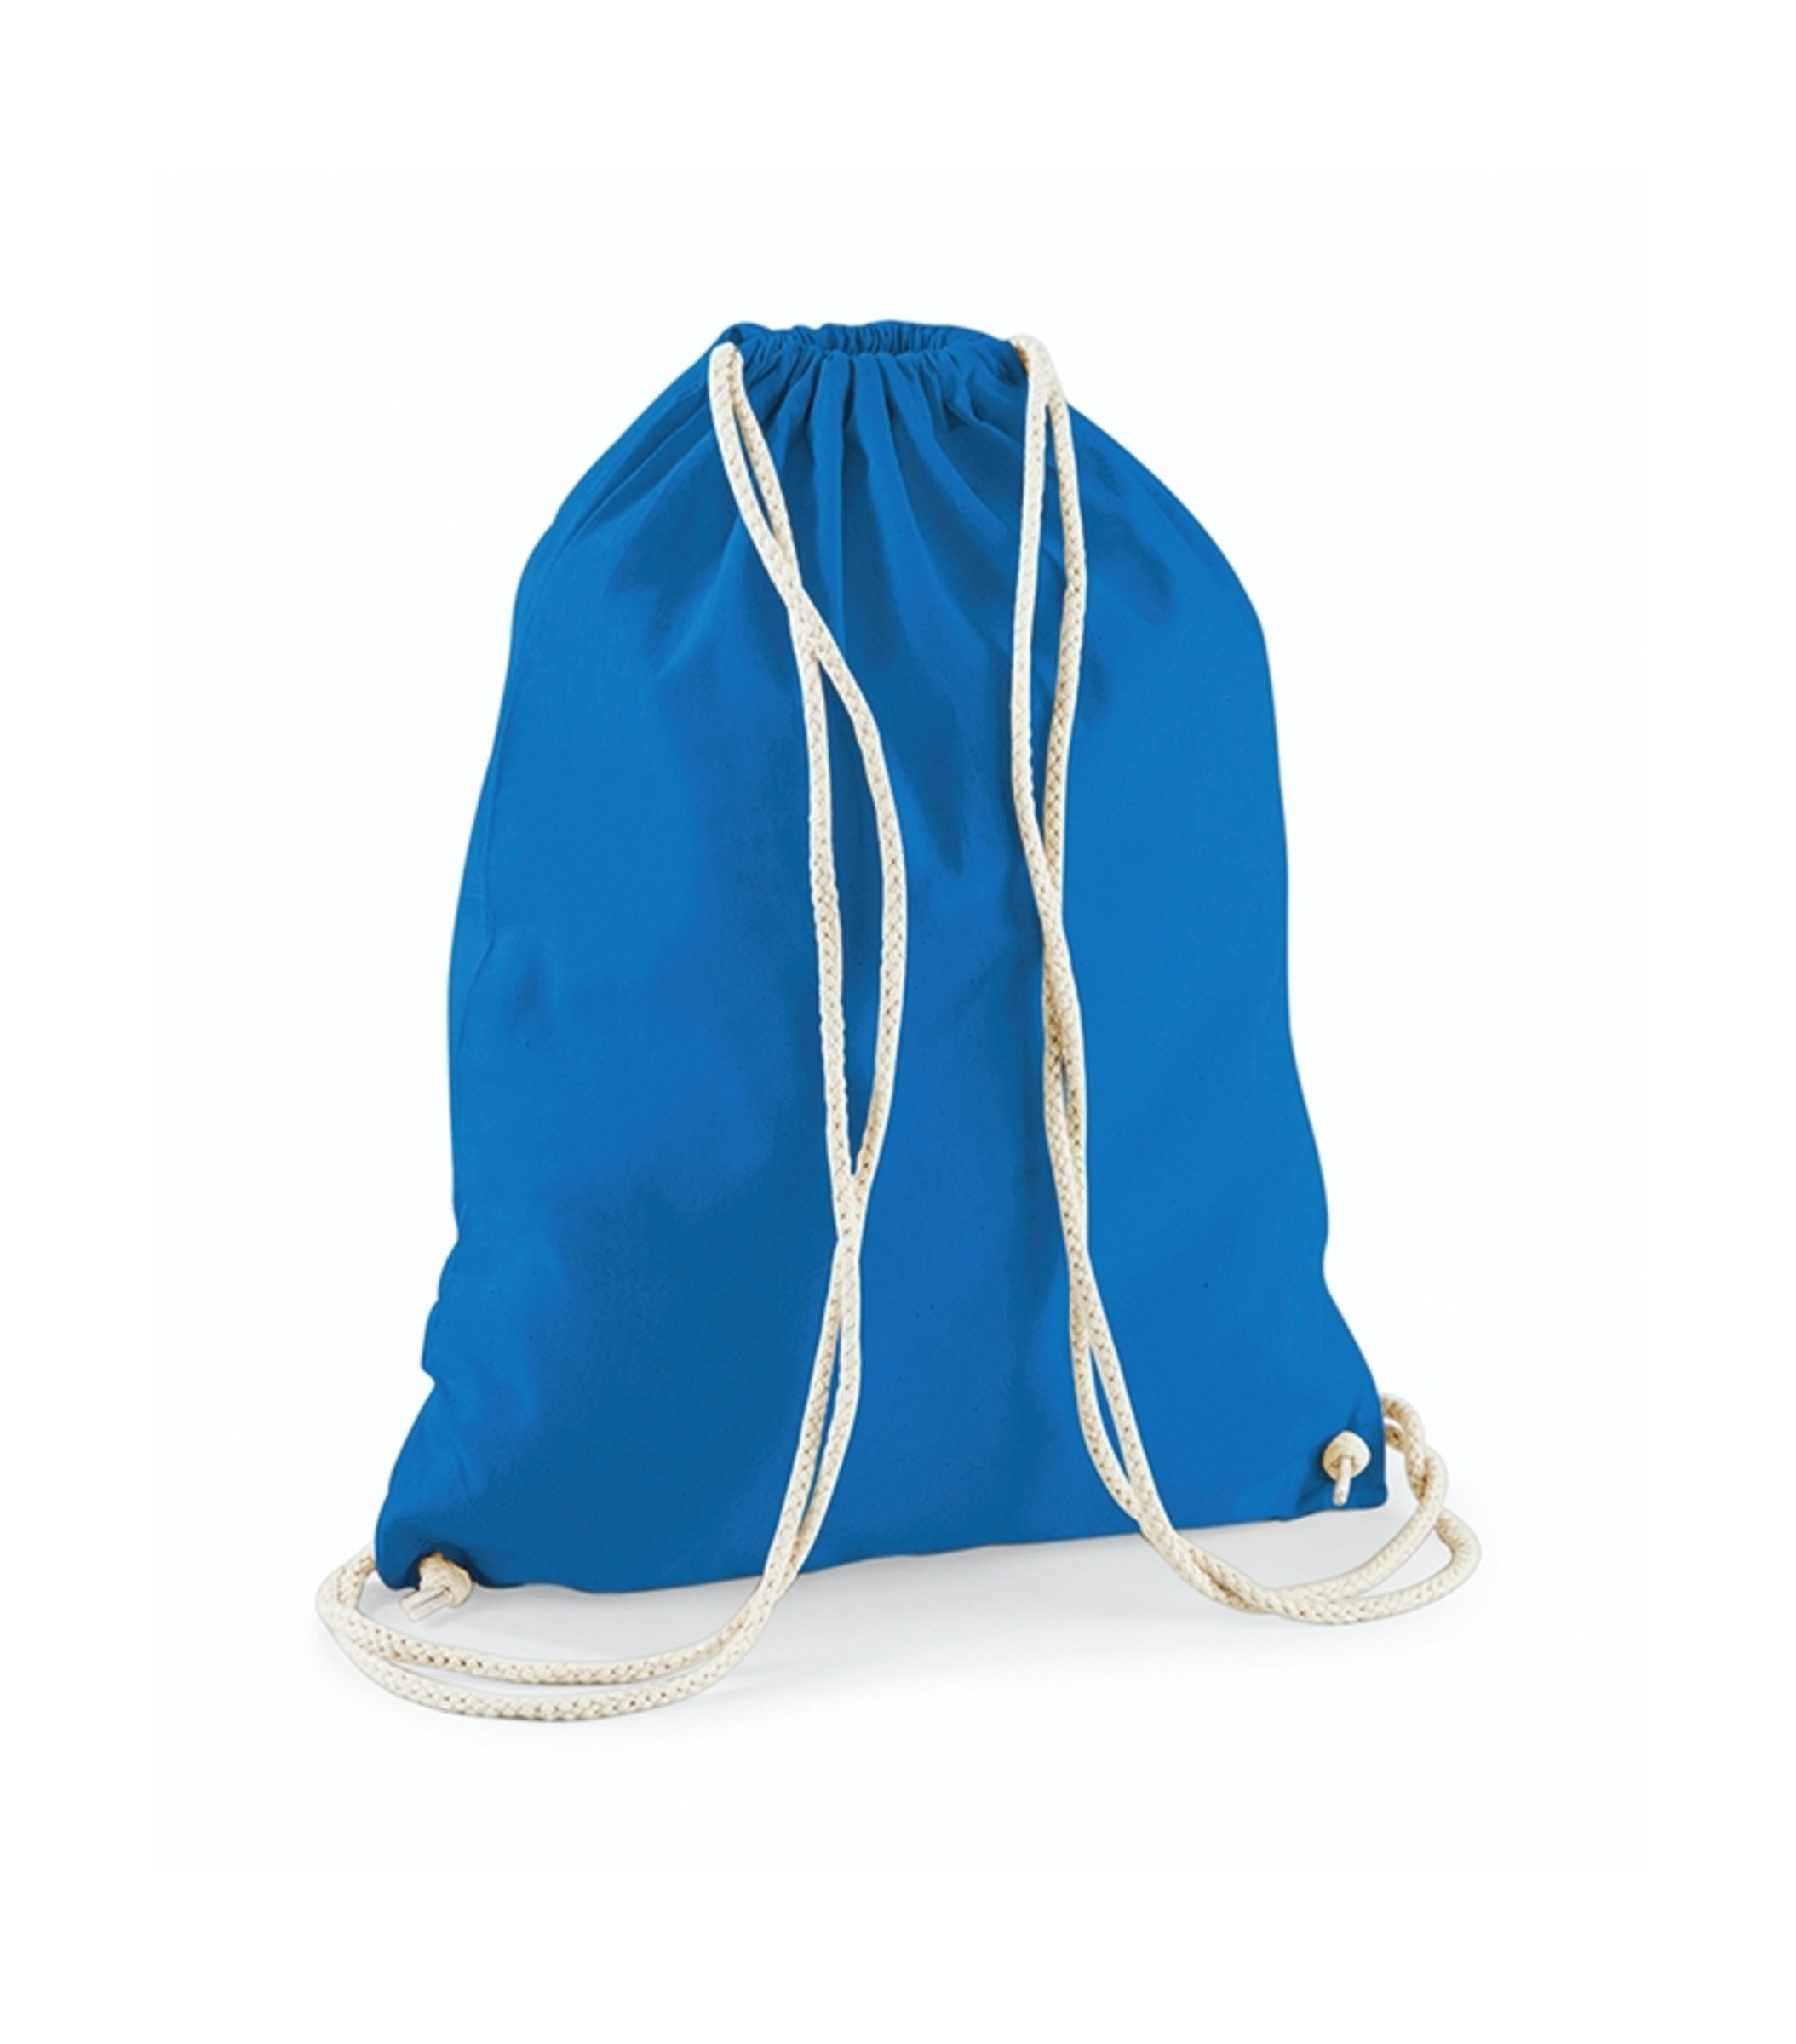 Westford Mill Cotton Gymsack - Sapphire Blue - One Size